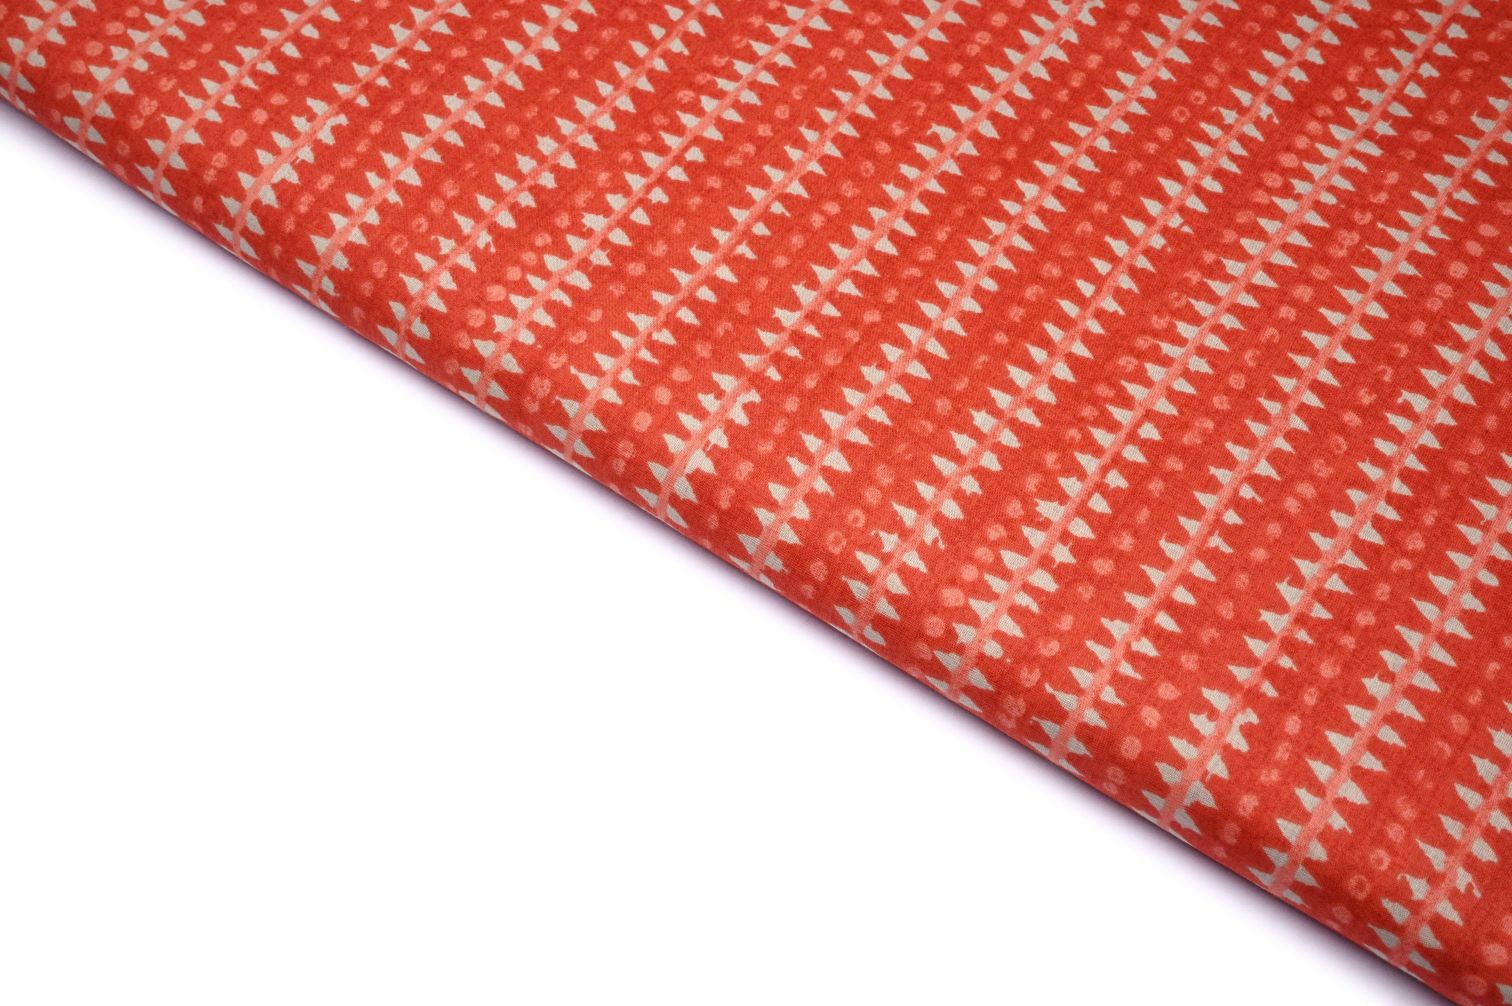 JAPONICA ORANGE COLOR COTTON JAPIPURI IKKAT PATTERN STRIPES WITH SELF DOTS PATTERN PRINTED FABRIC 11591